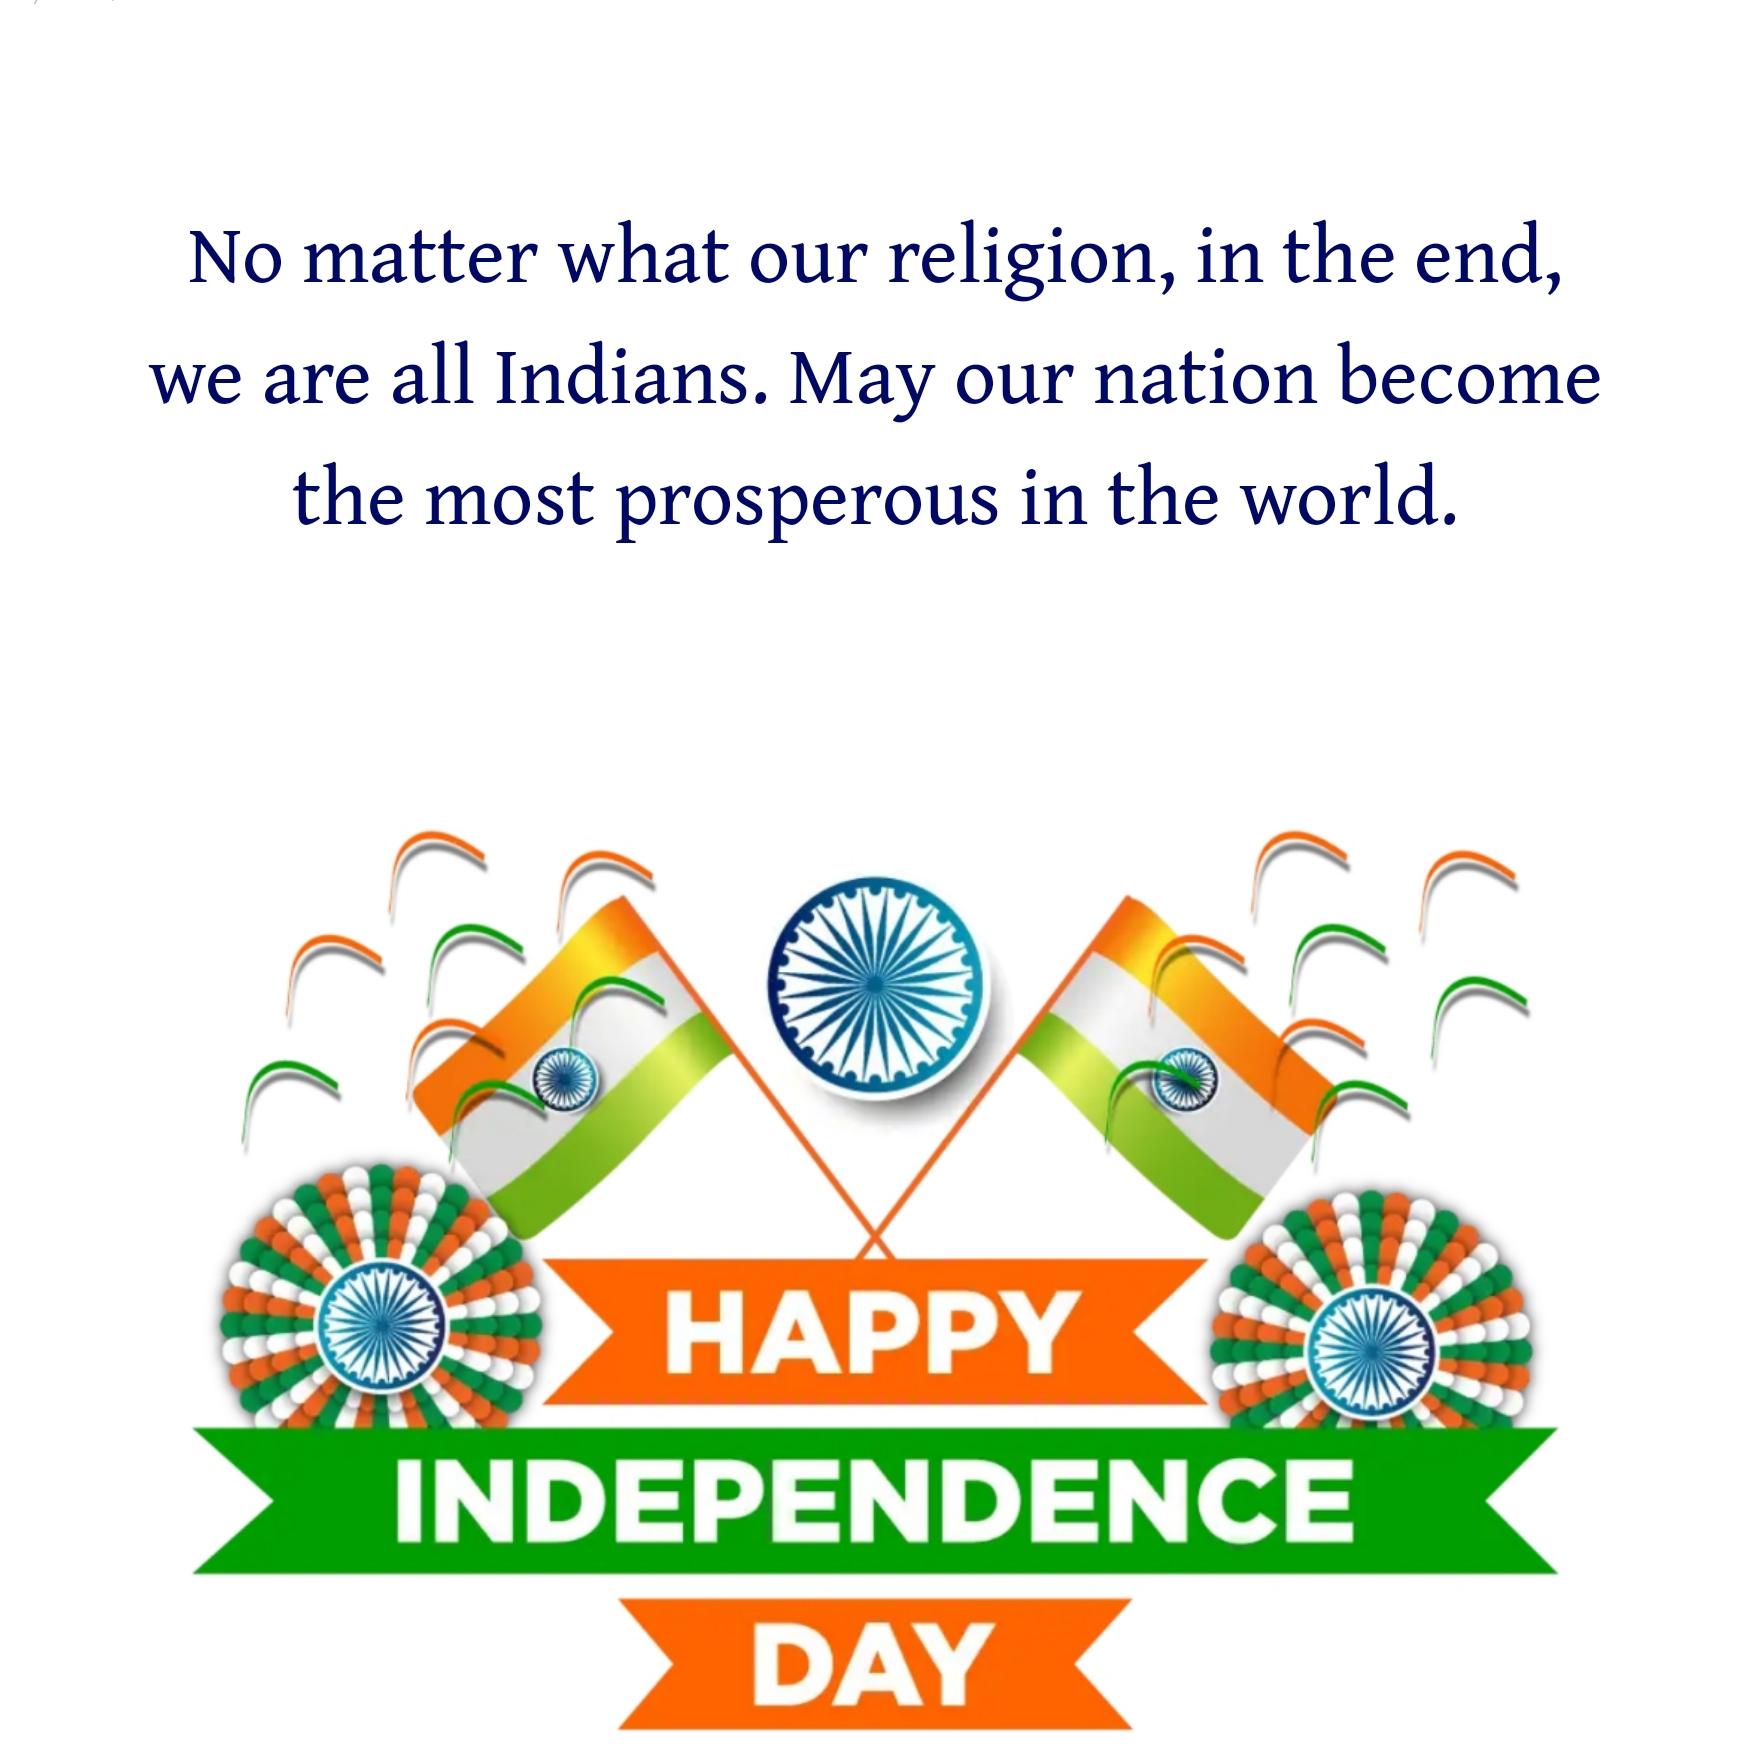 No matter what our religion in the end we are all Indians